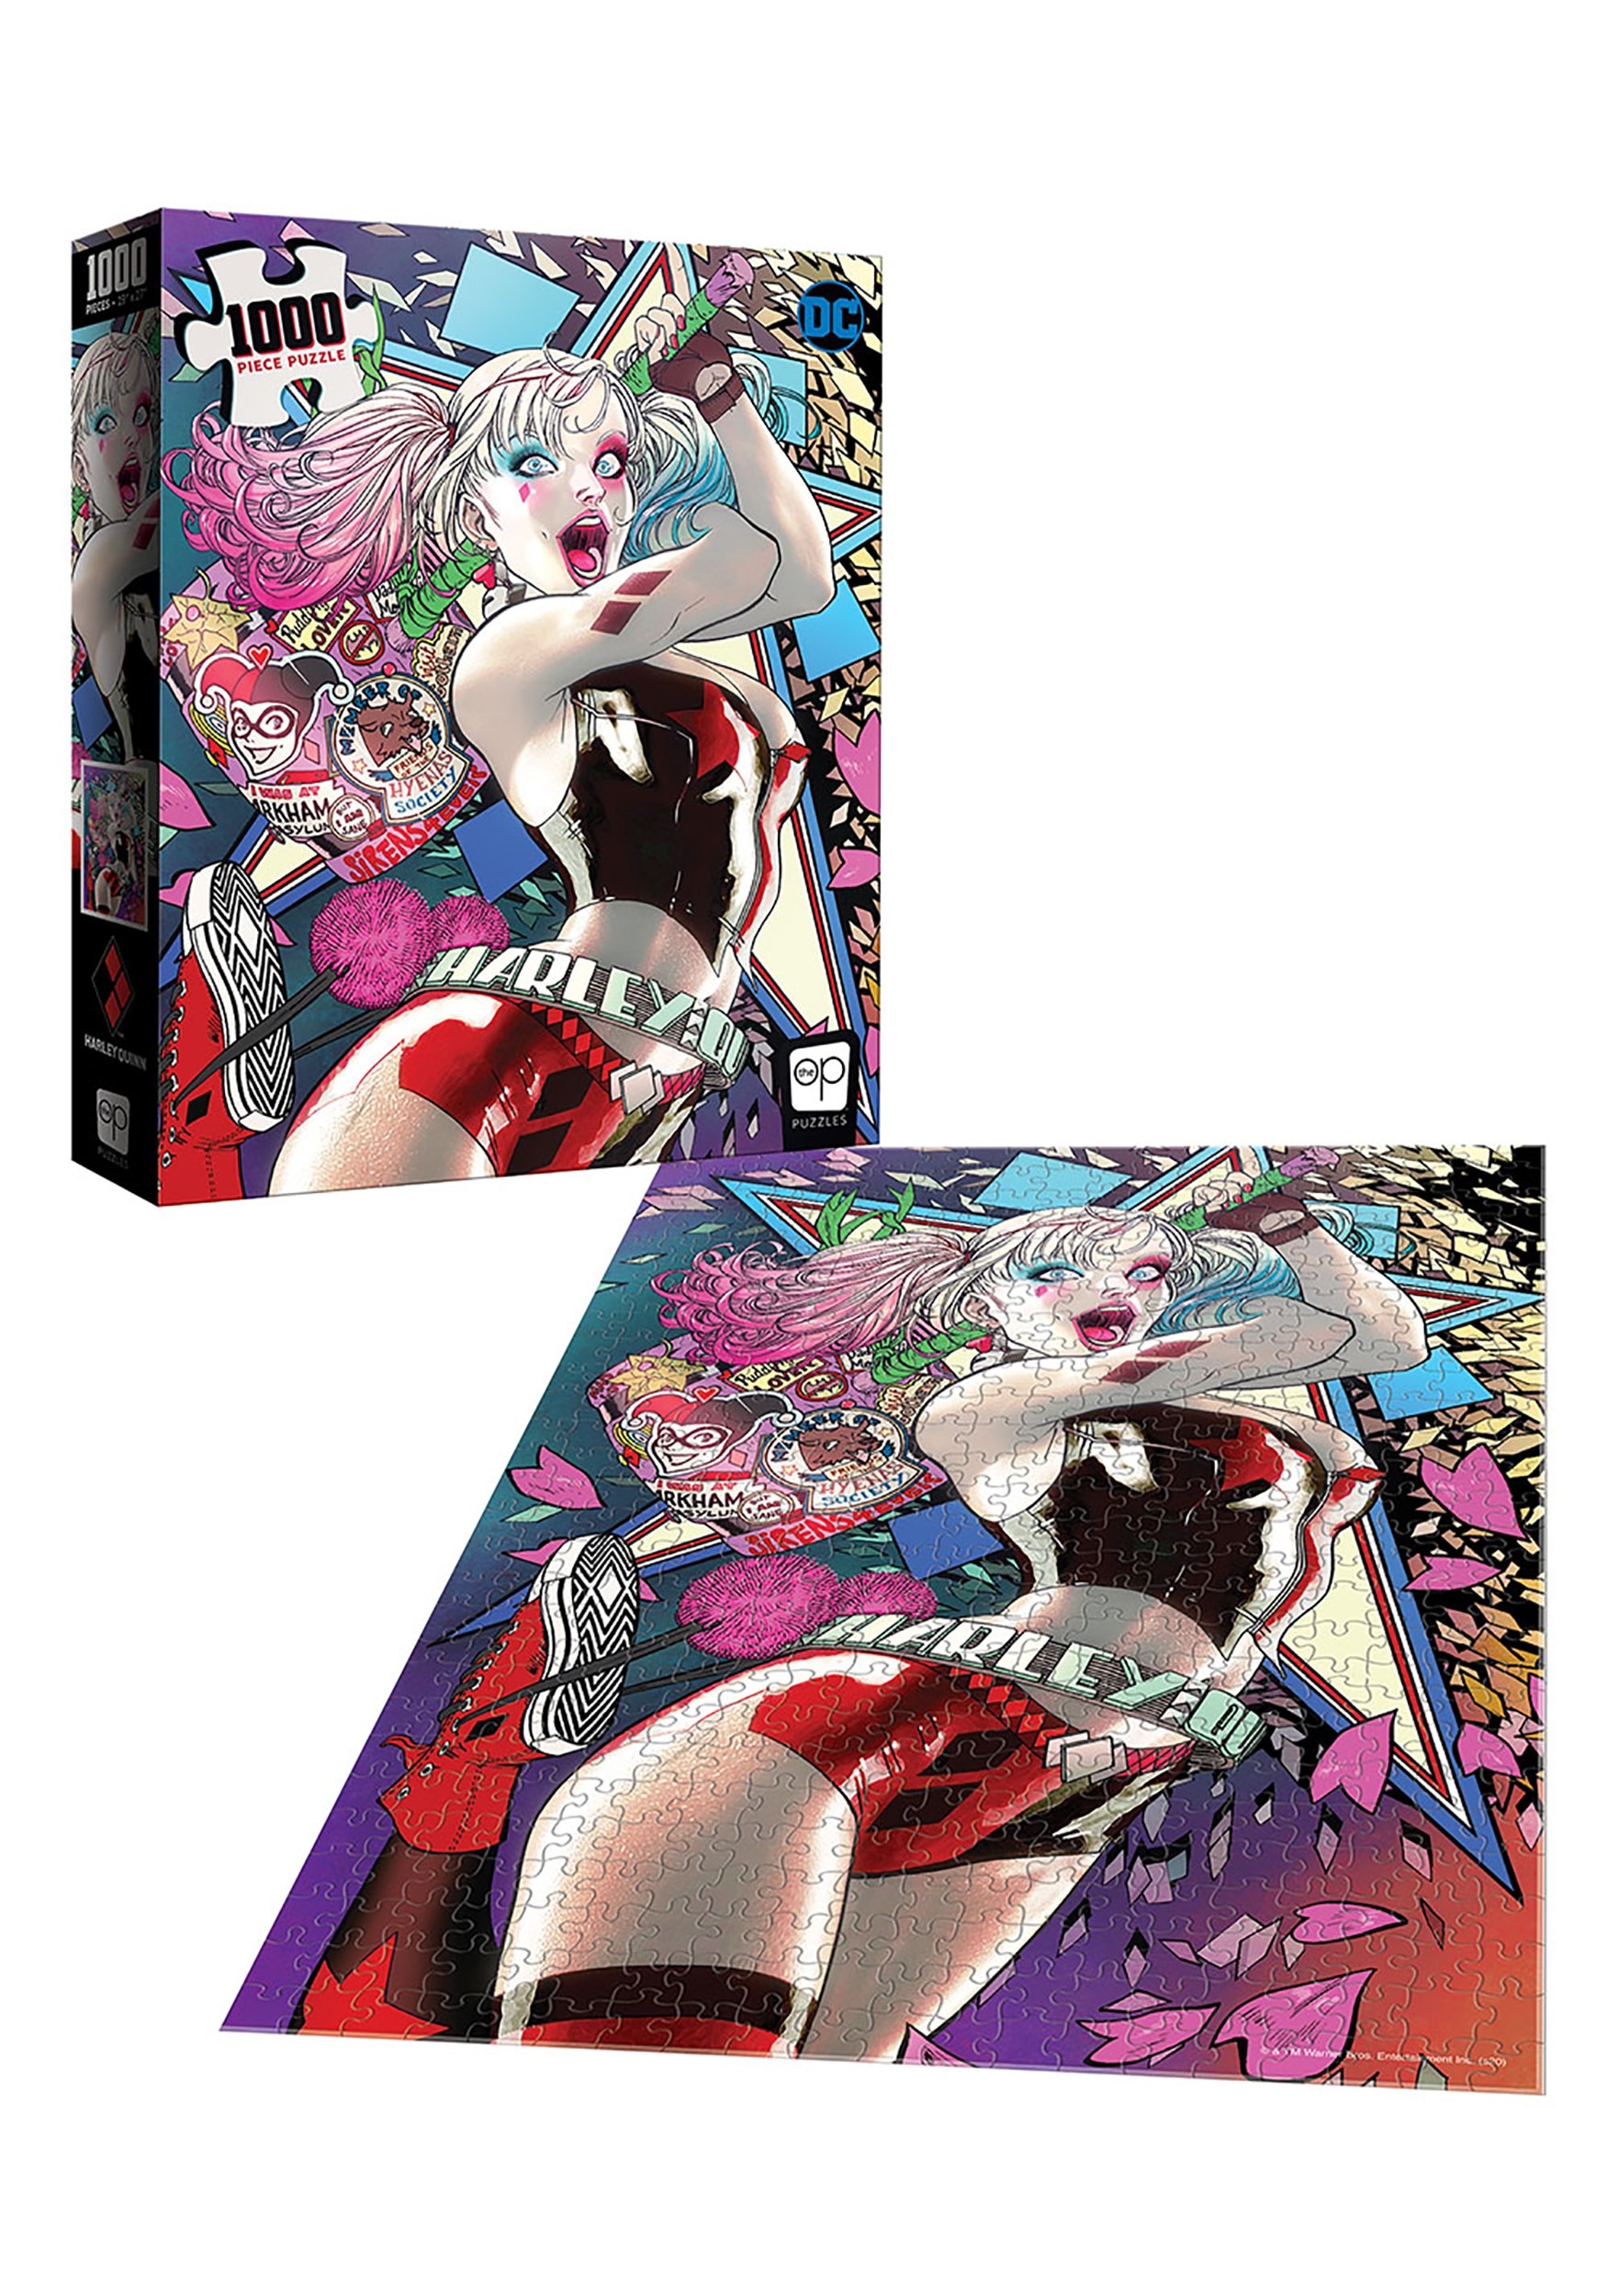 1000 Pieces Harley Quinn “Die Laughing” Jigsaw Puzzle 